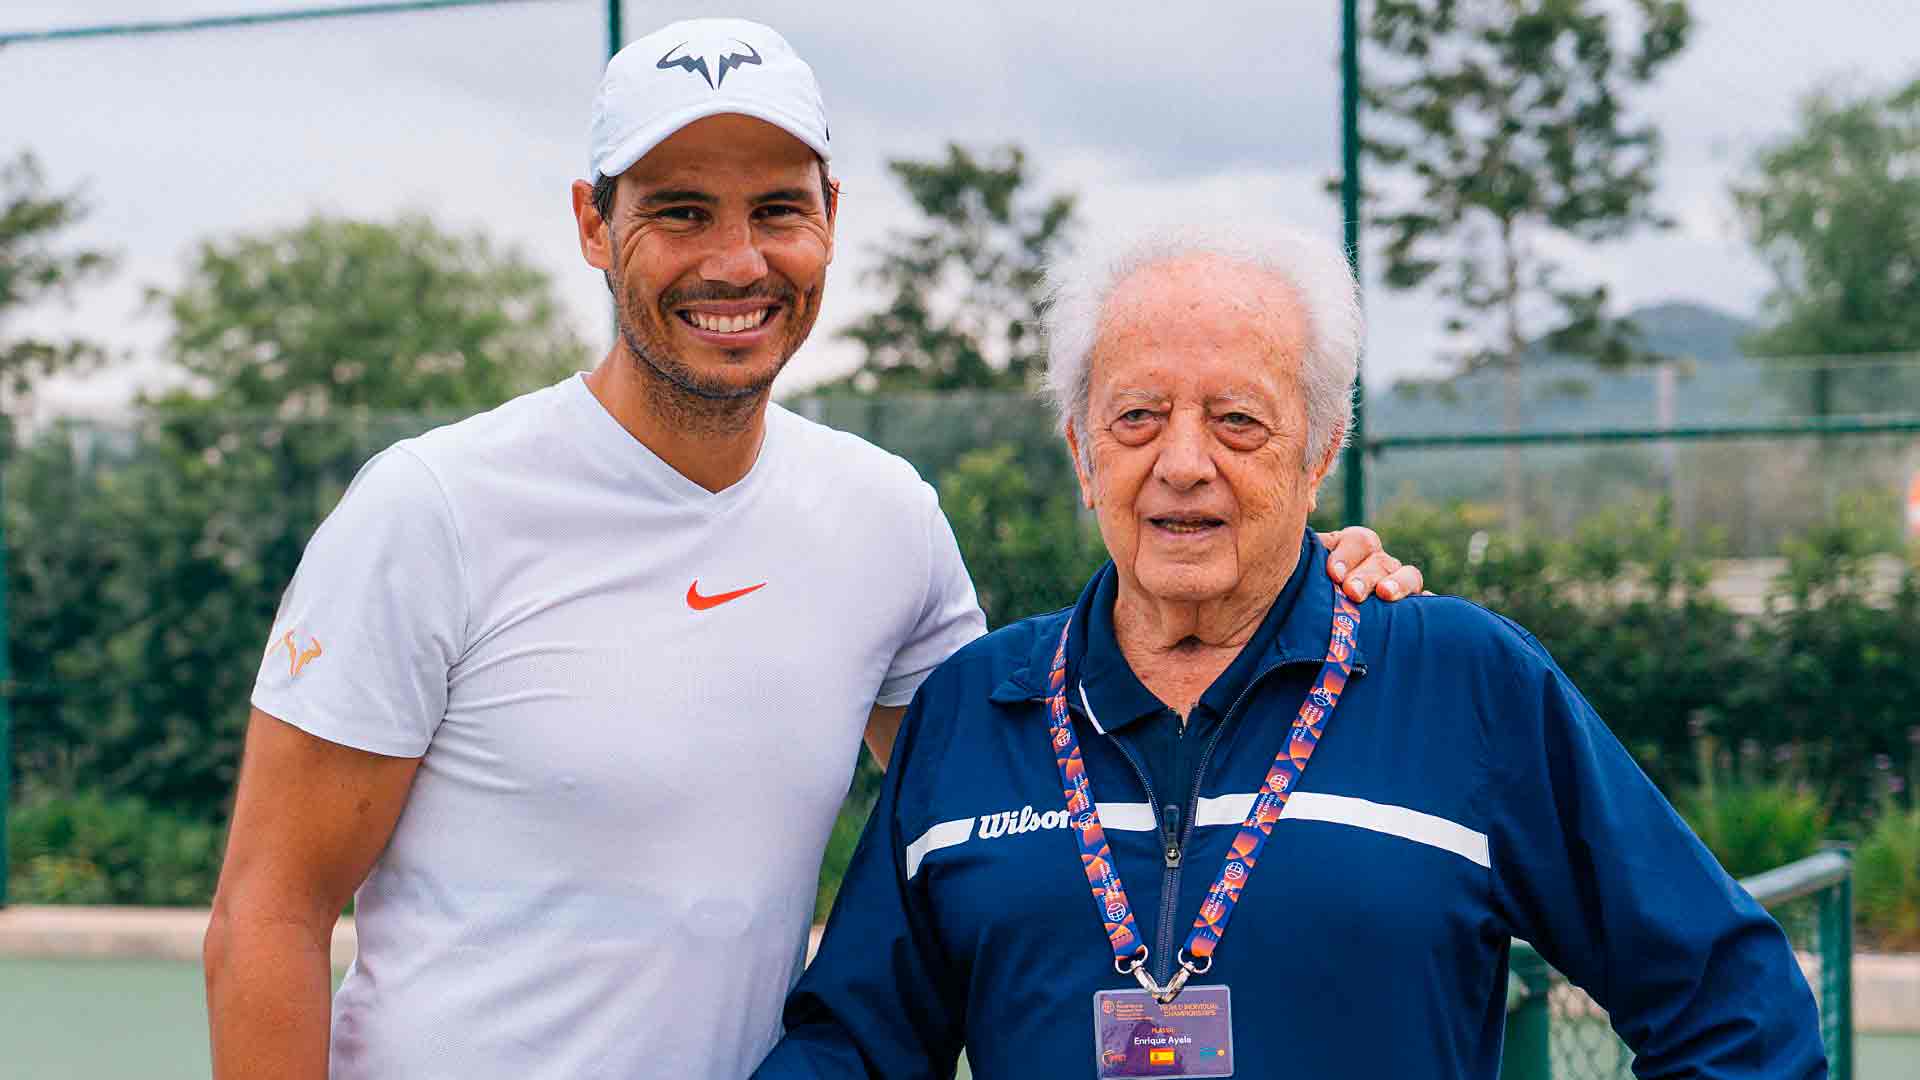 Rafael Nadal spent time with Enrique Ayala, a 90-year-old who won the Over-90 Spanish Championship in June at the Rafa Nadal Academy by Movistar.